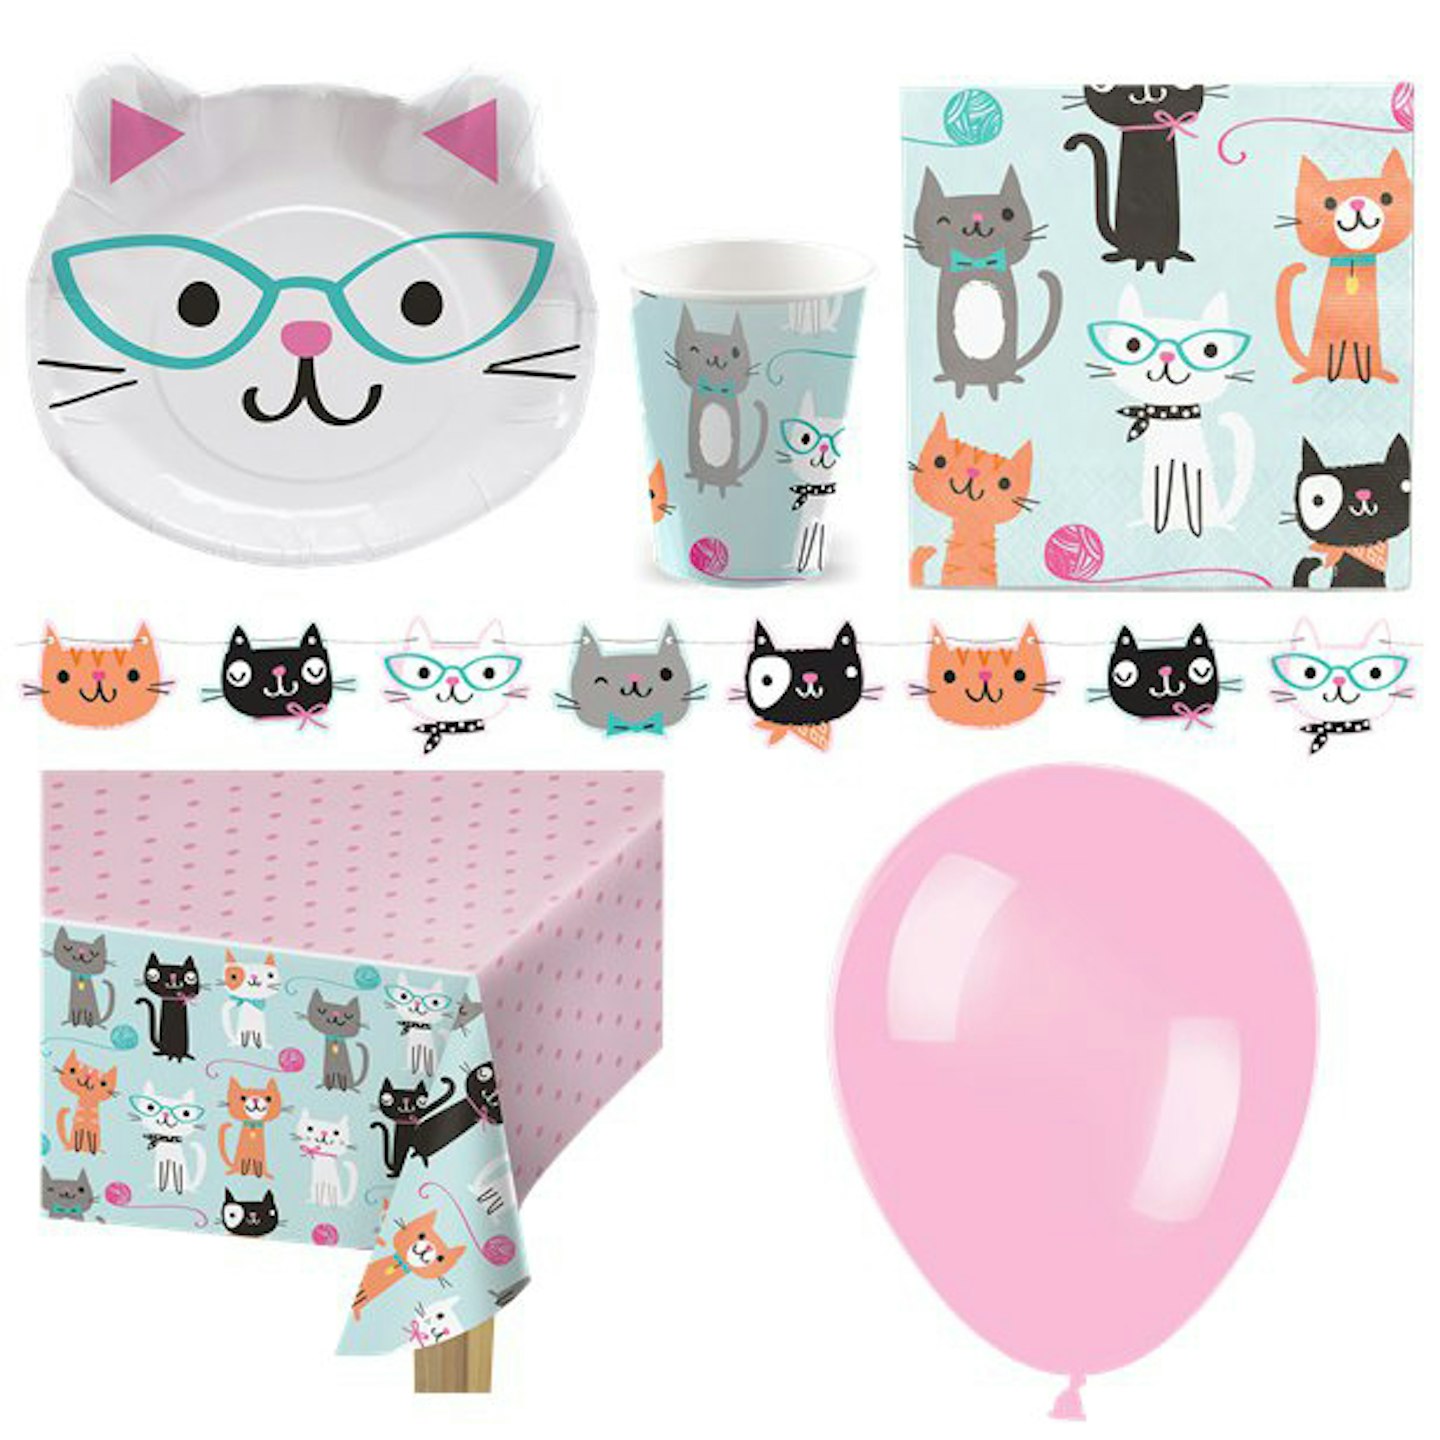 Purr-Fect Party Pack for 8, 19.99